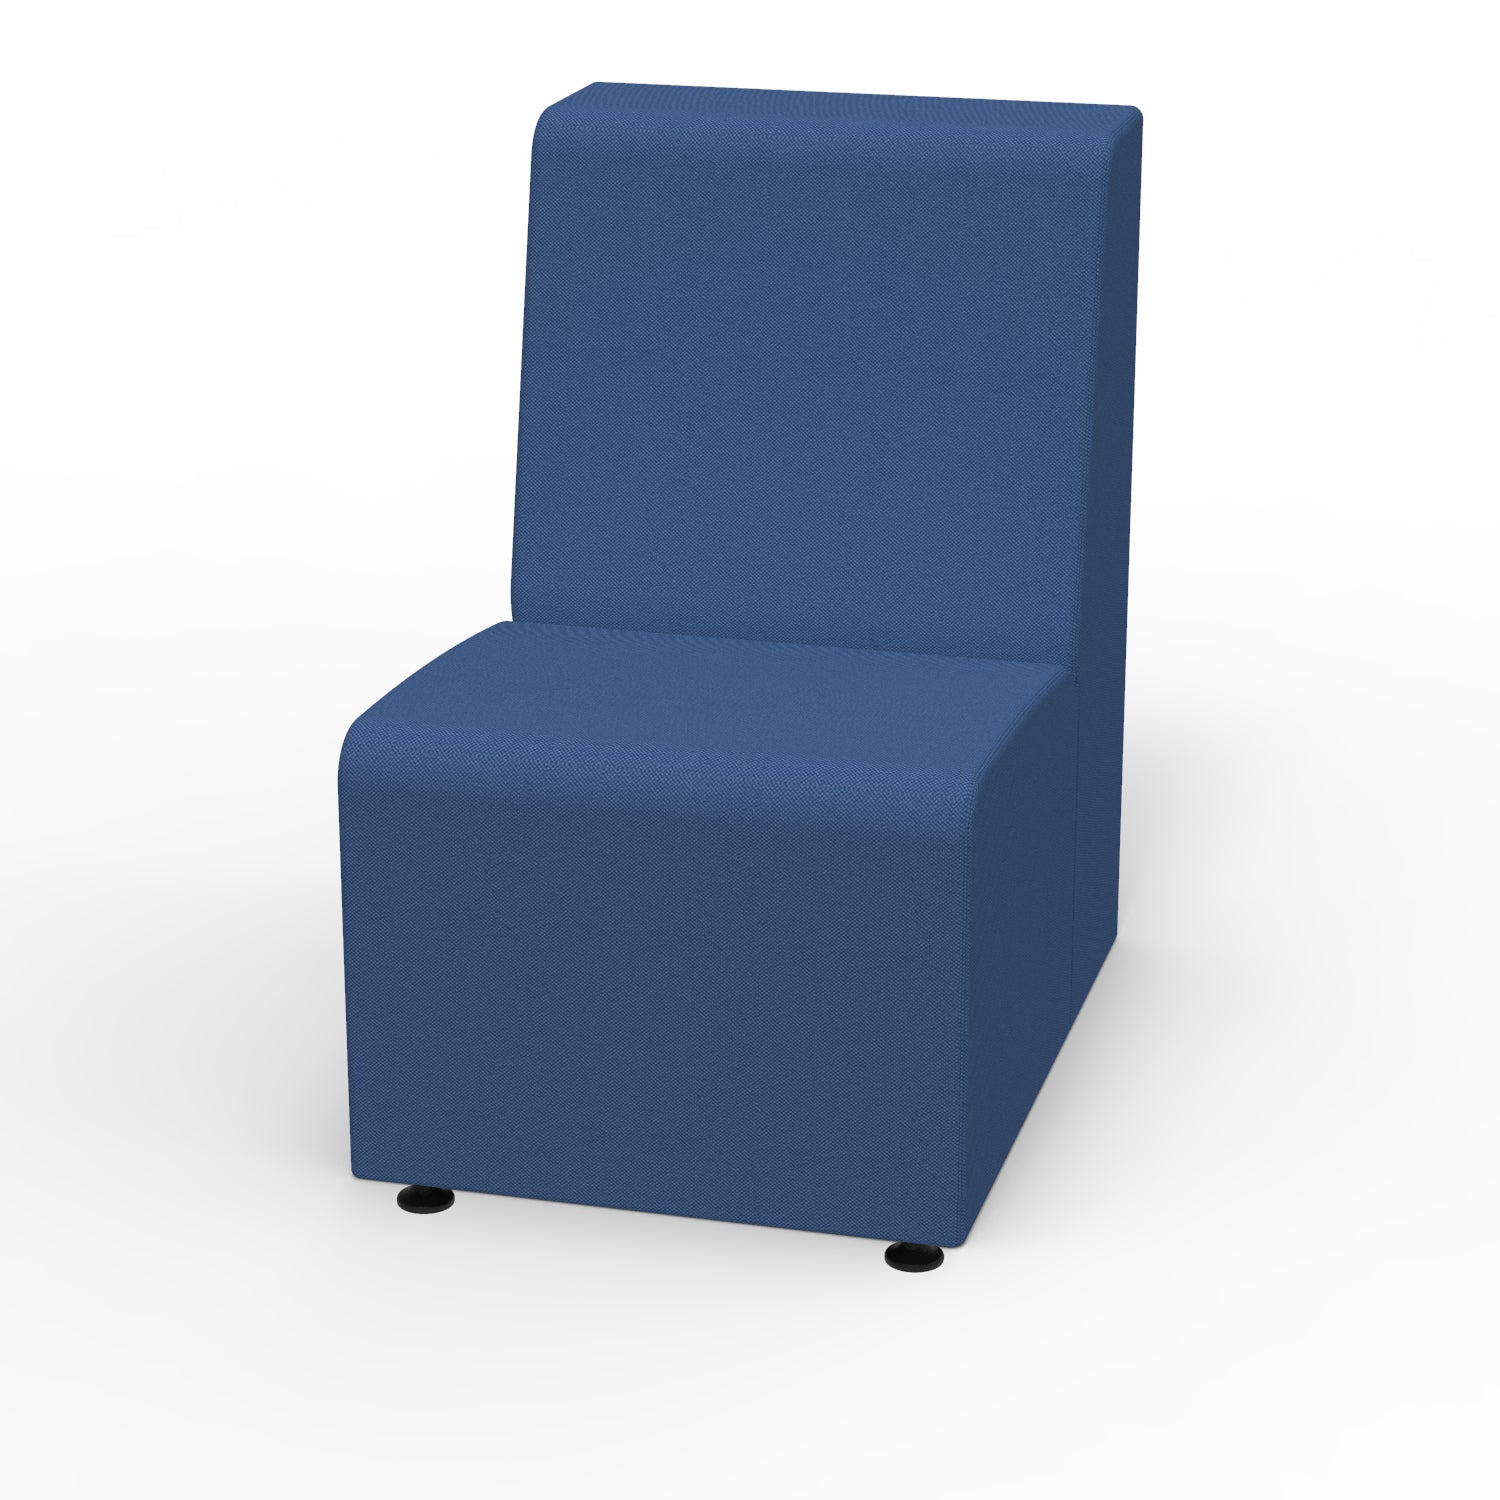 Sonik Soft Seating Single Chair, 16" Seat Height